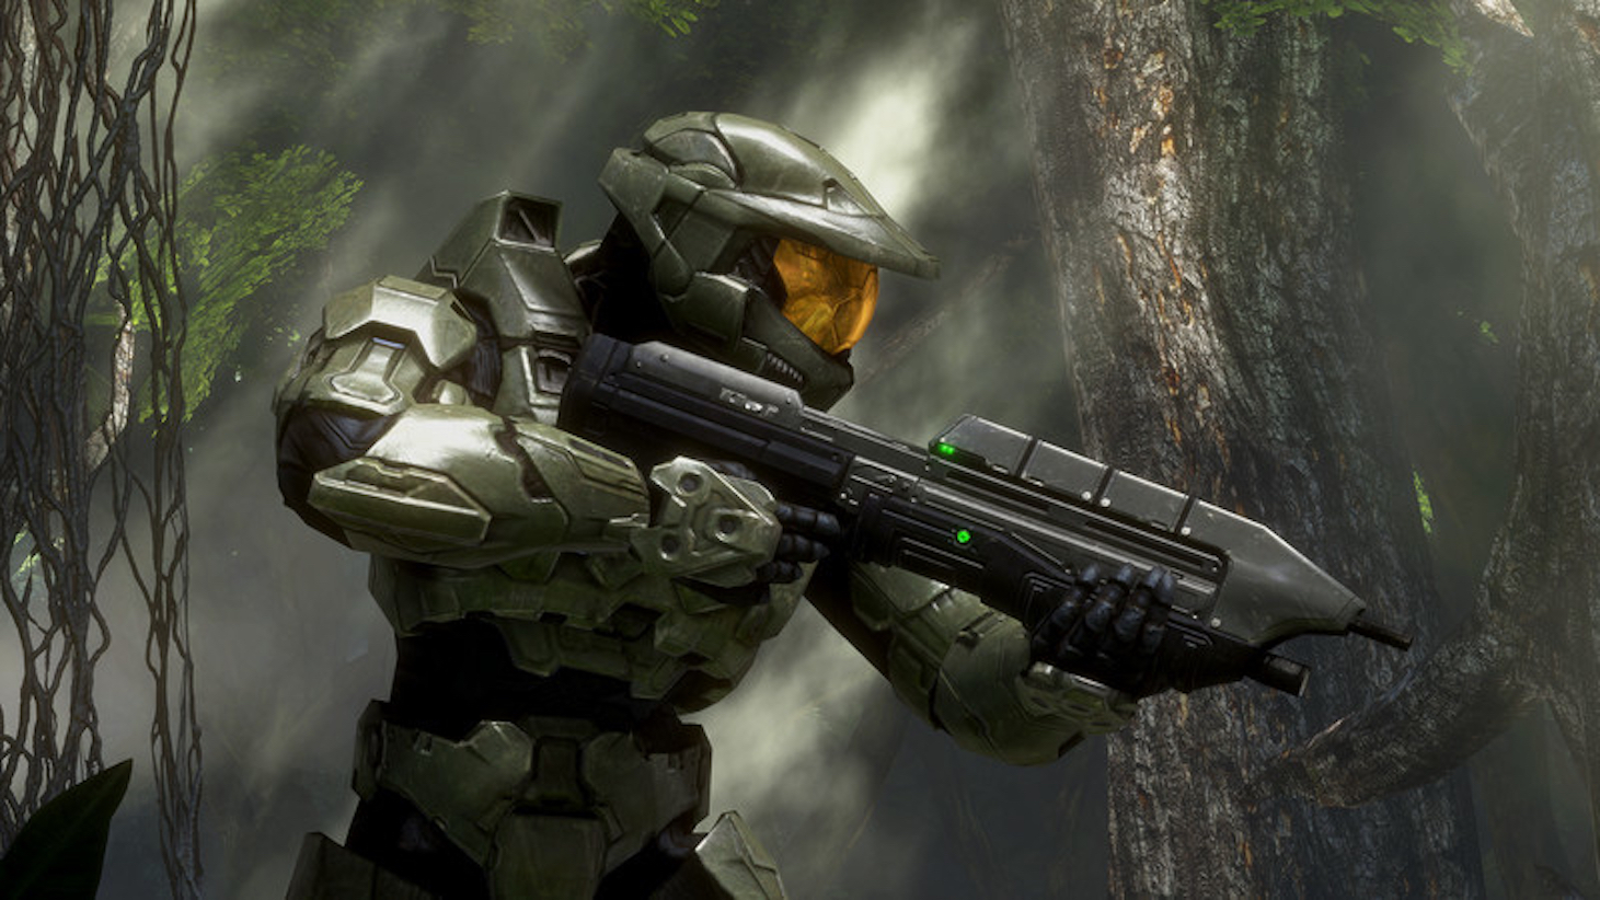 Halo: The Master Chief Collection on Steam Deck - Analysis and